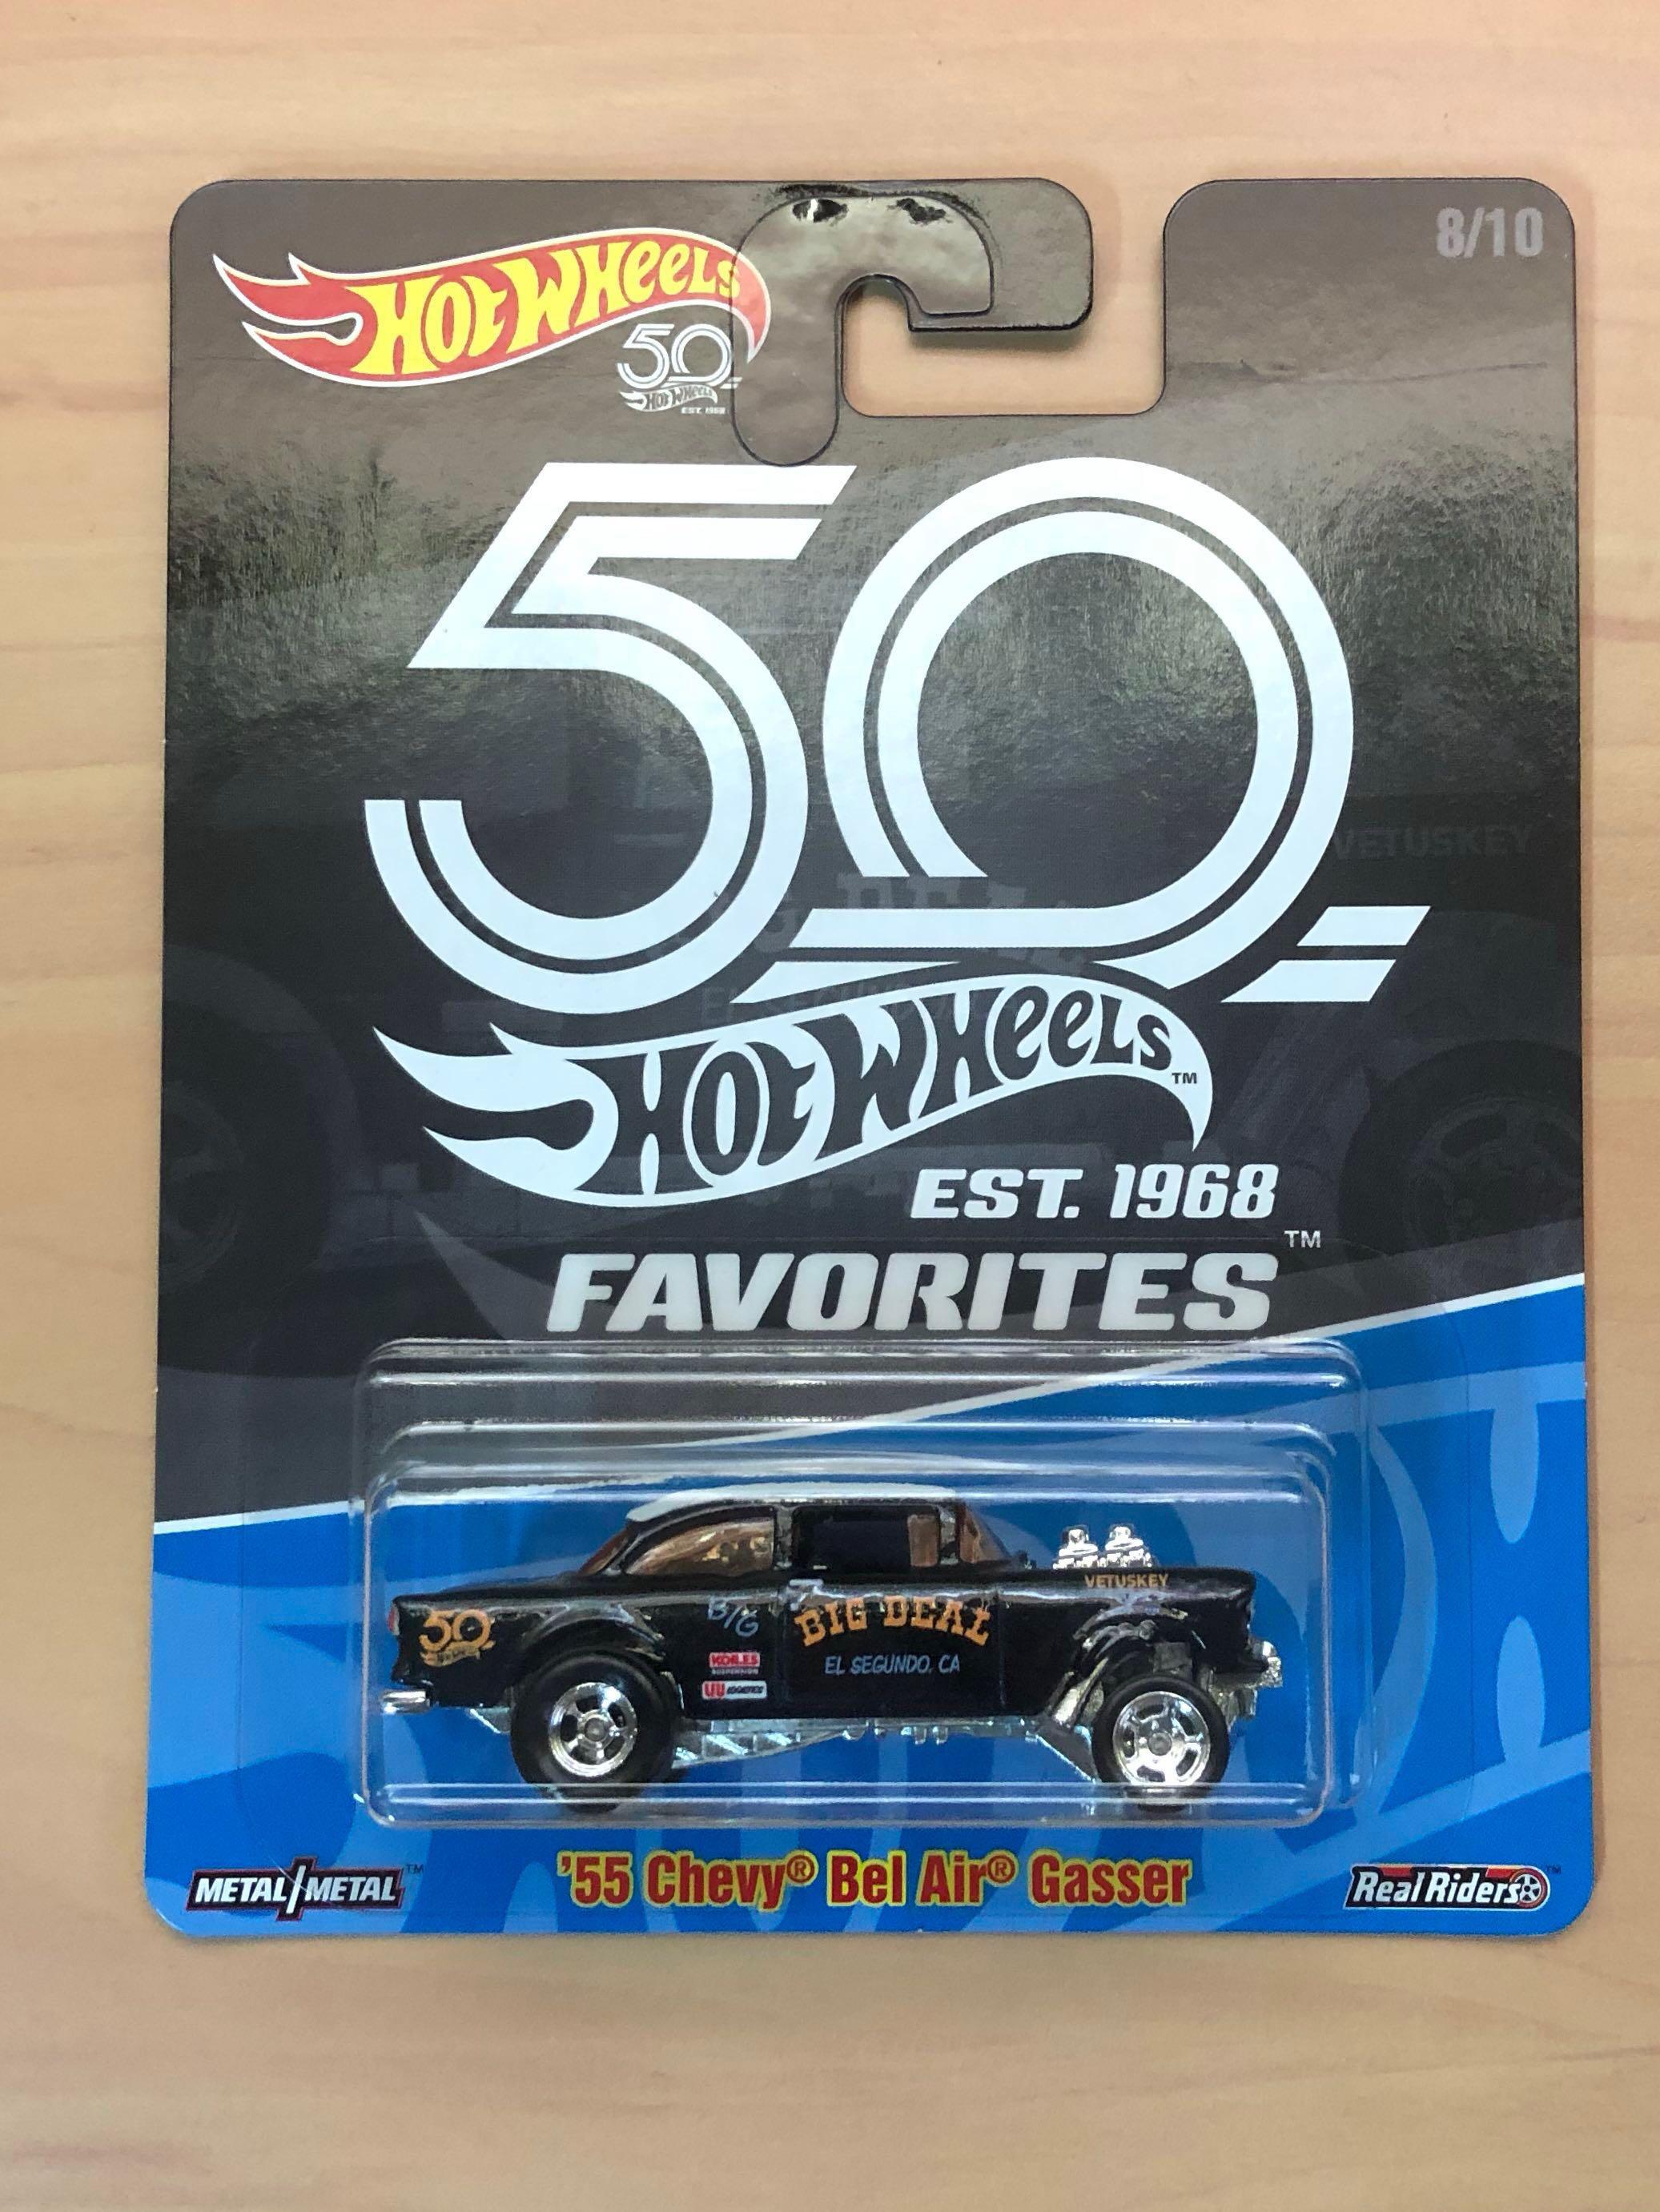 50th Anniversary Favorites '55 Chevy Bel Air GASSER Real Riders 8/10 